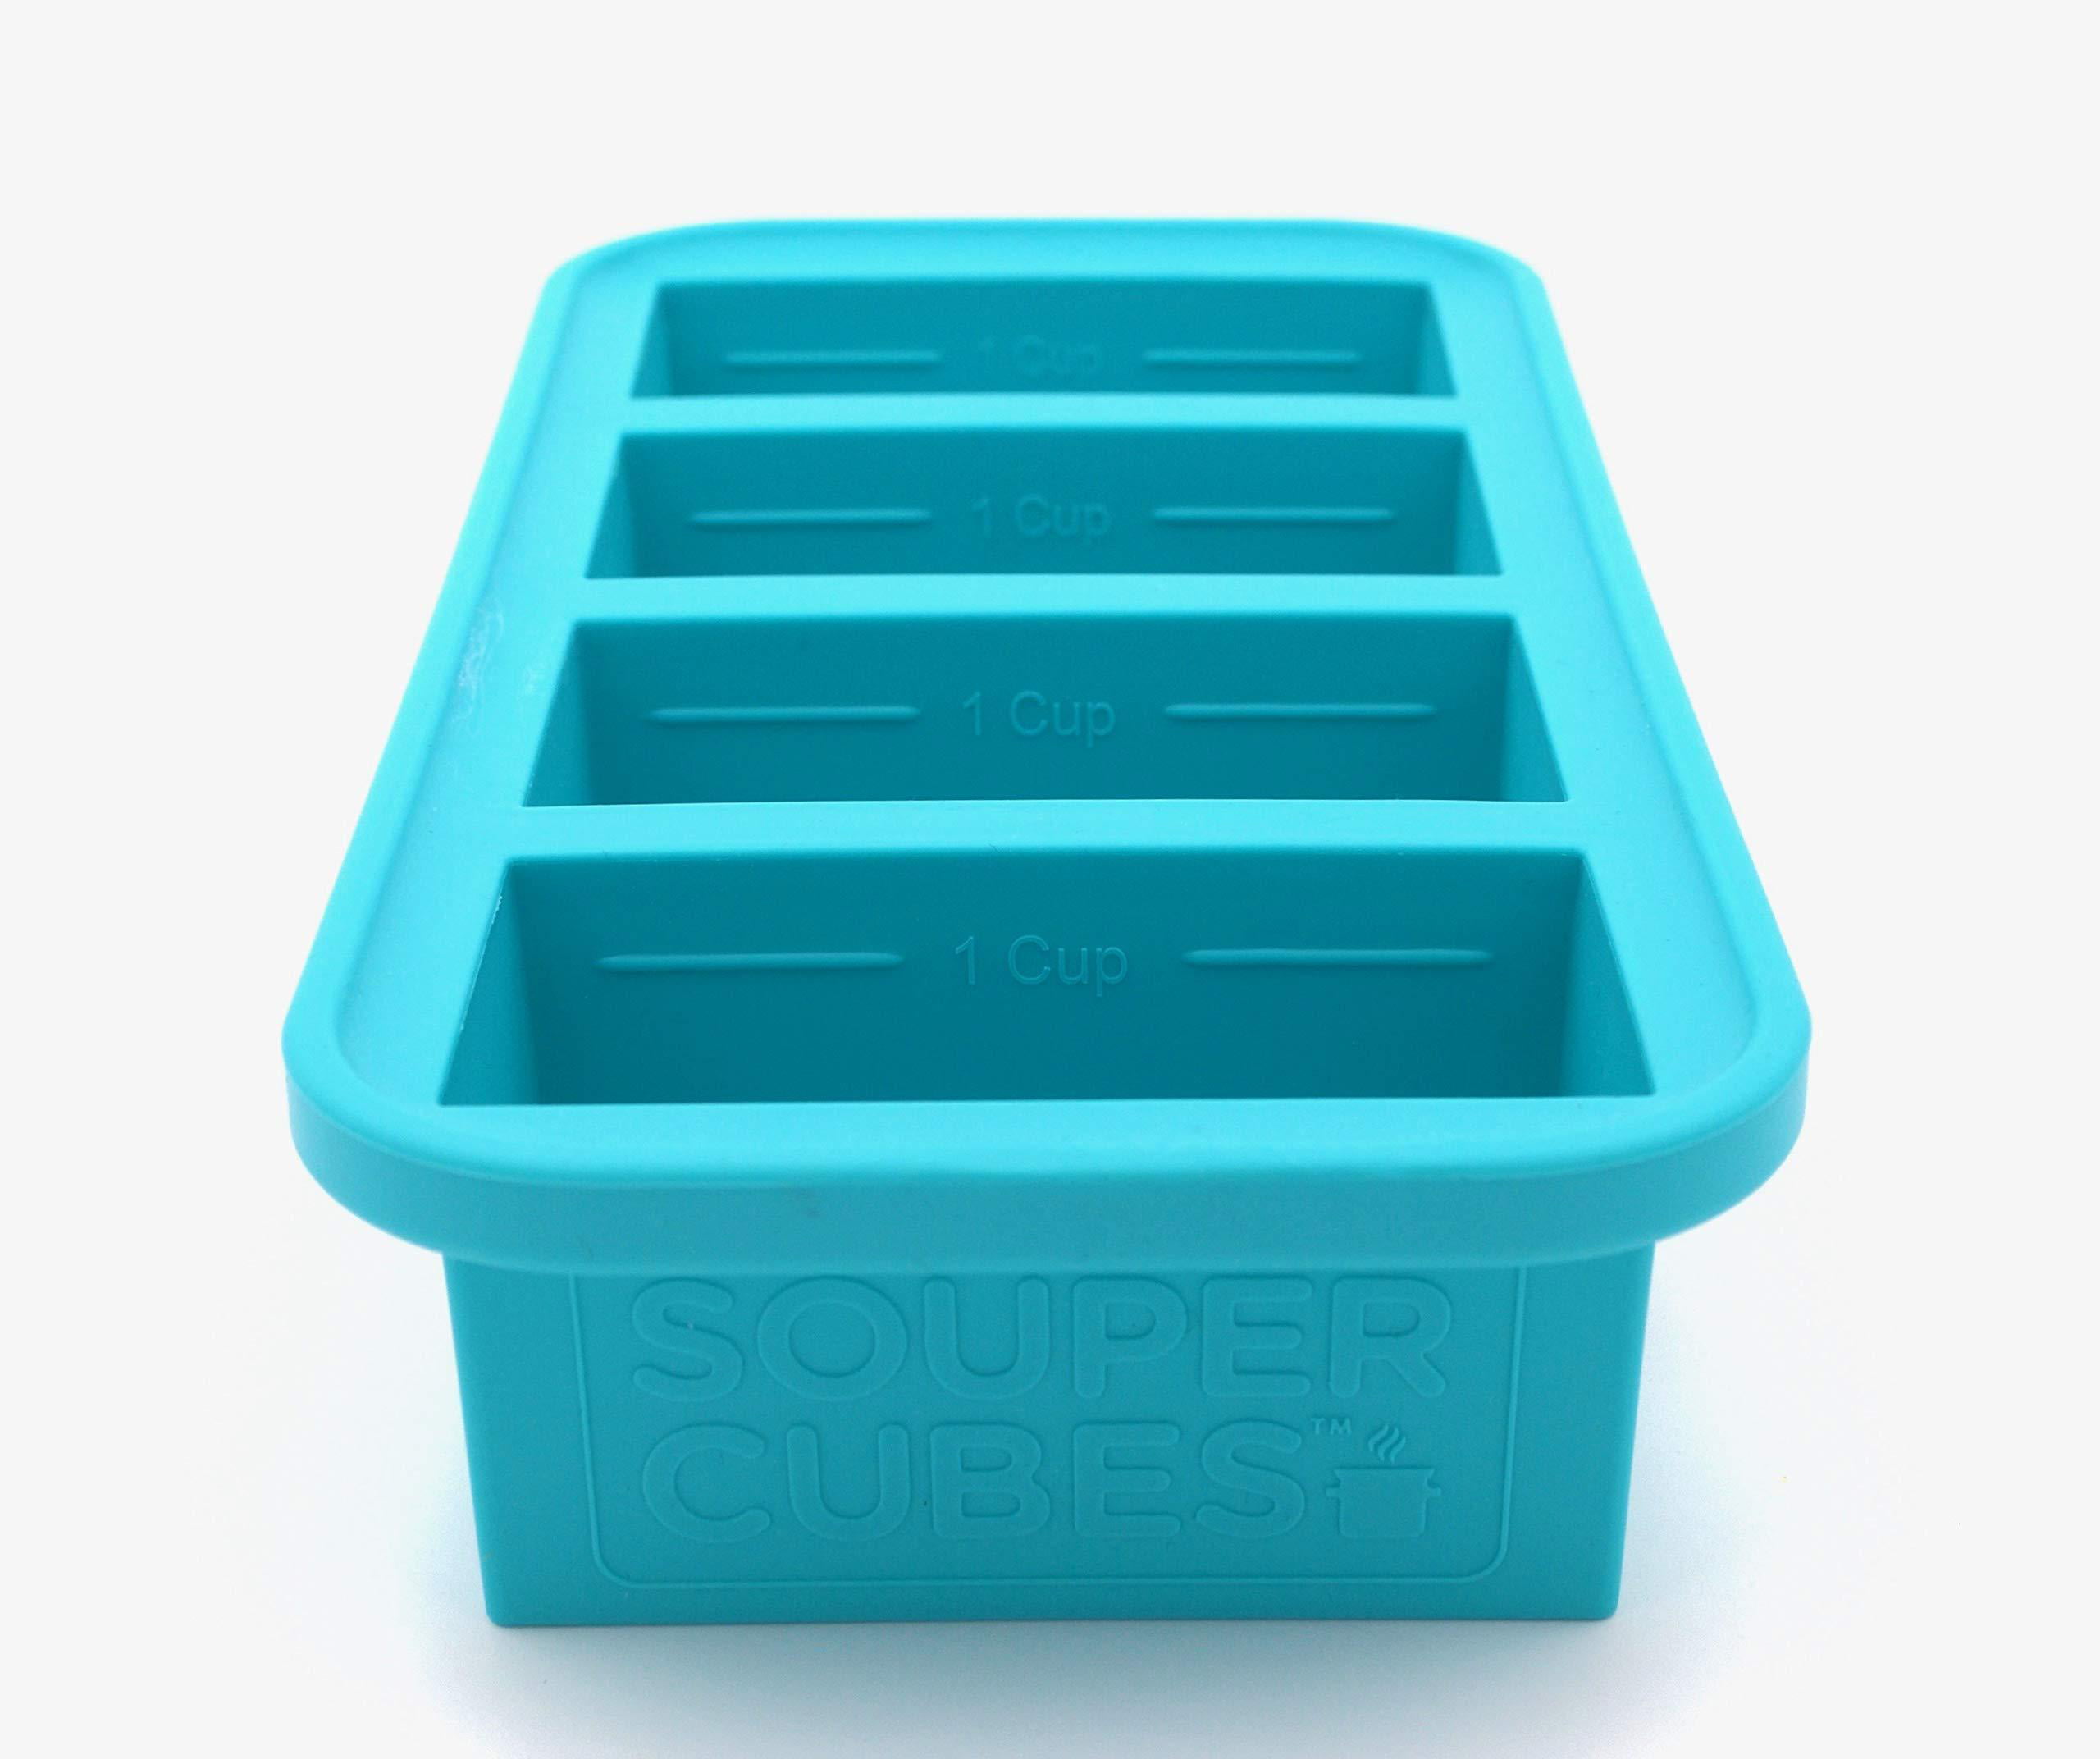 Souper Cubes 1-Cup Extra-Large Silicone Freezing Tray with Lid - 2 Pack - Makes